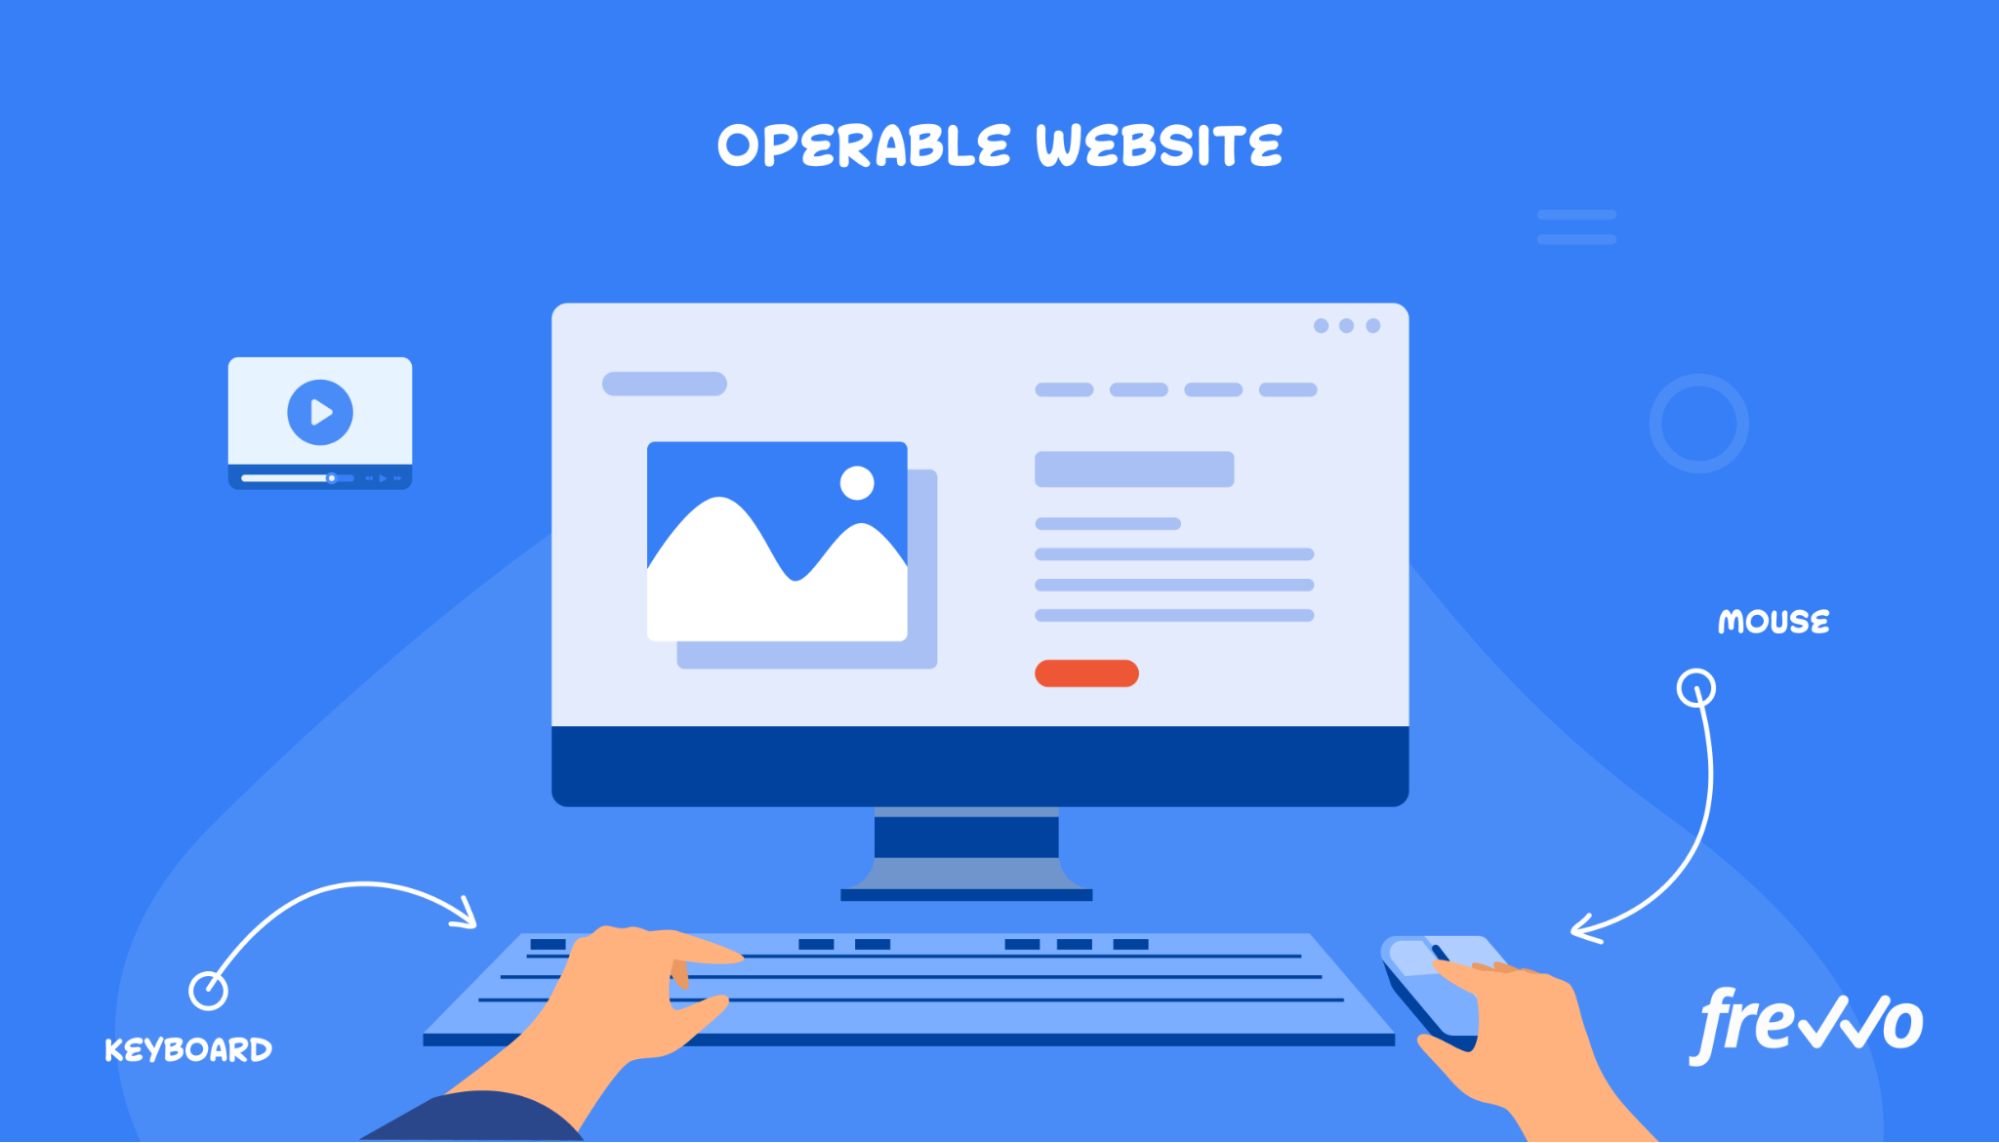 Creating an operable website